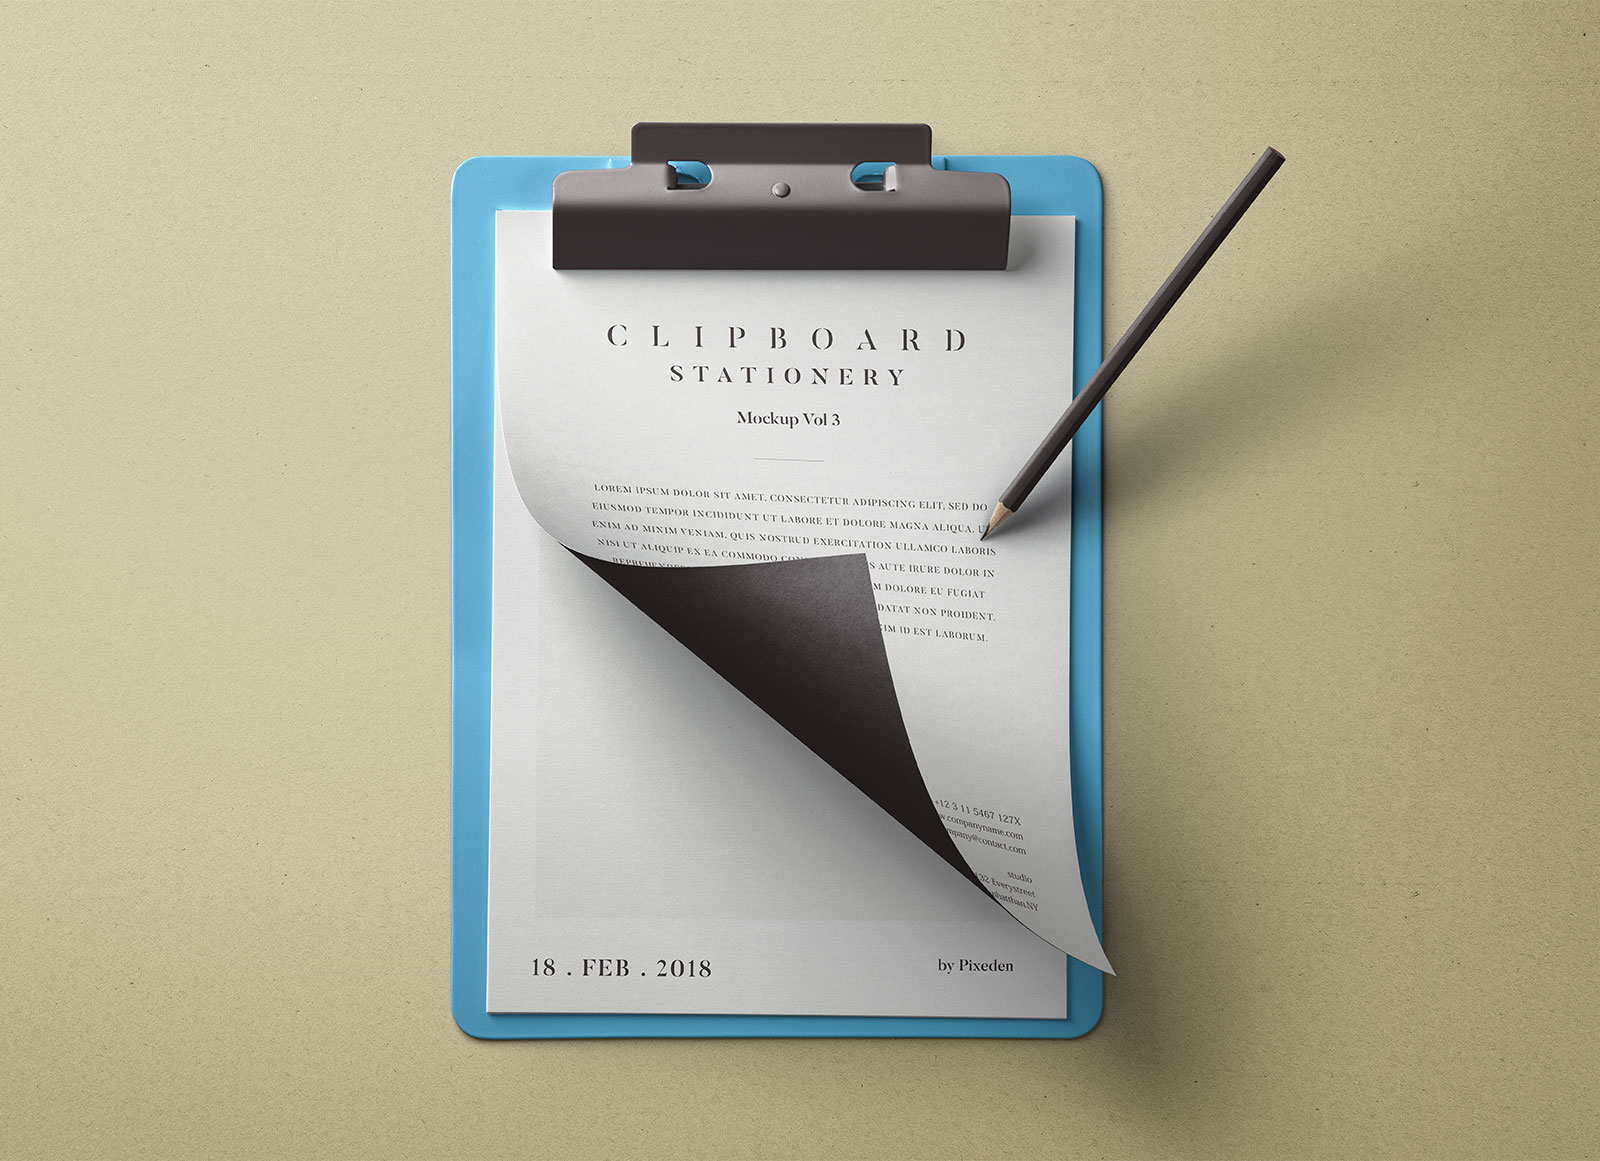 Free-Page-Curl-Clipboard-Mockup-PSD